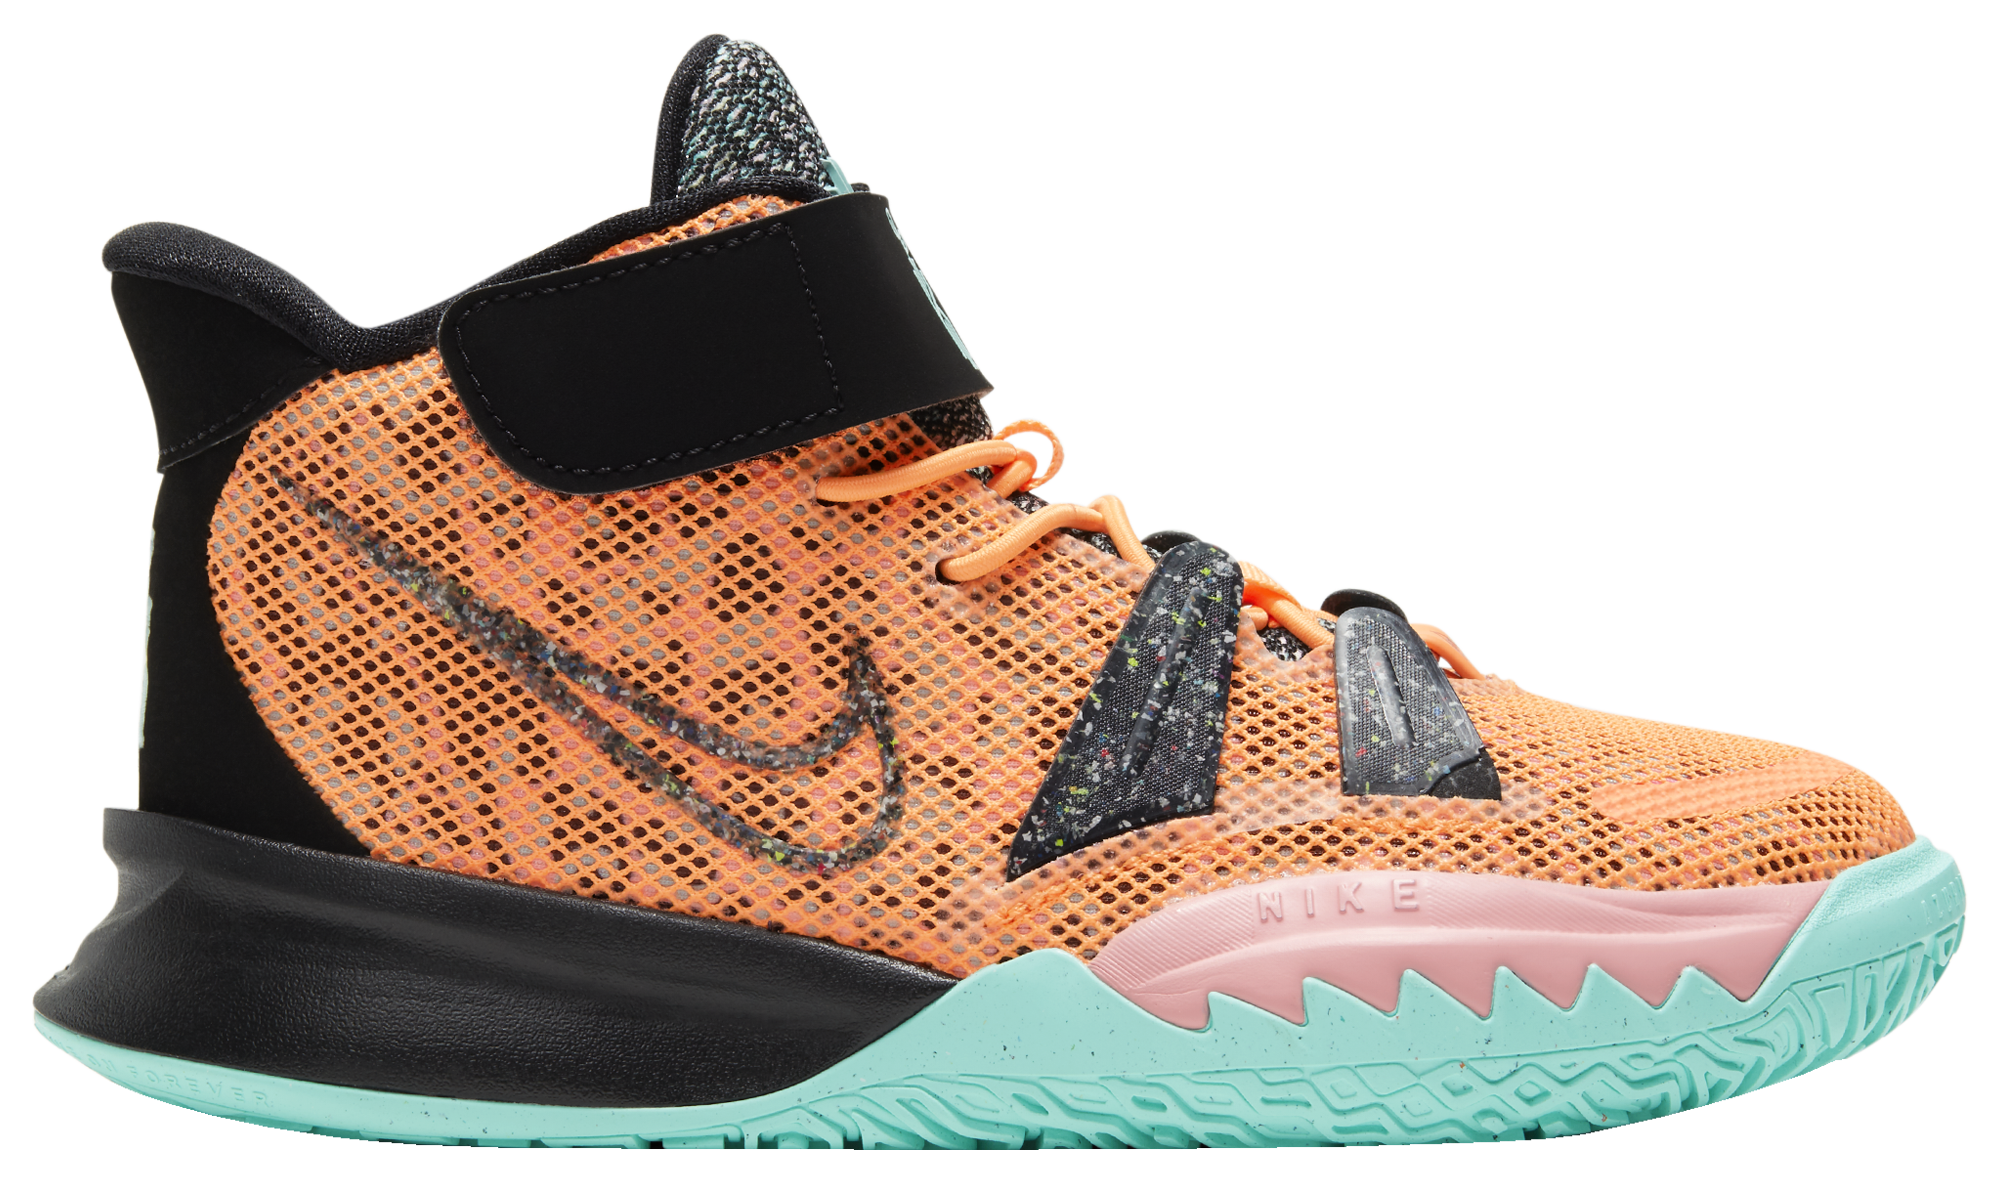 kyrie irving shoes mens brown